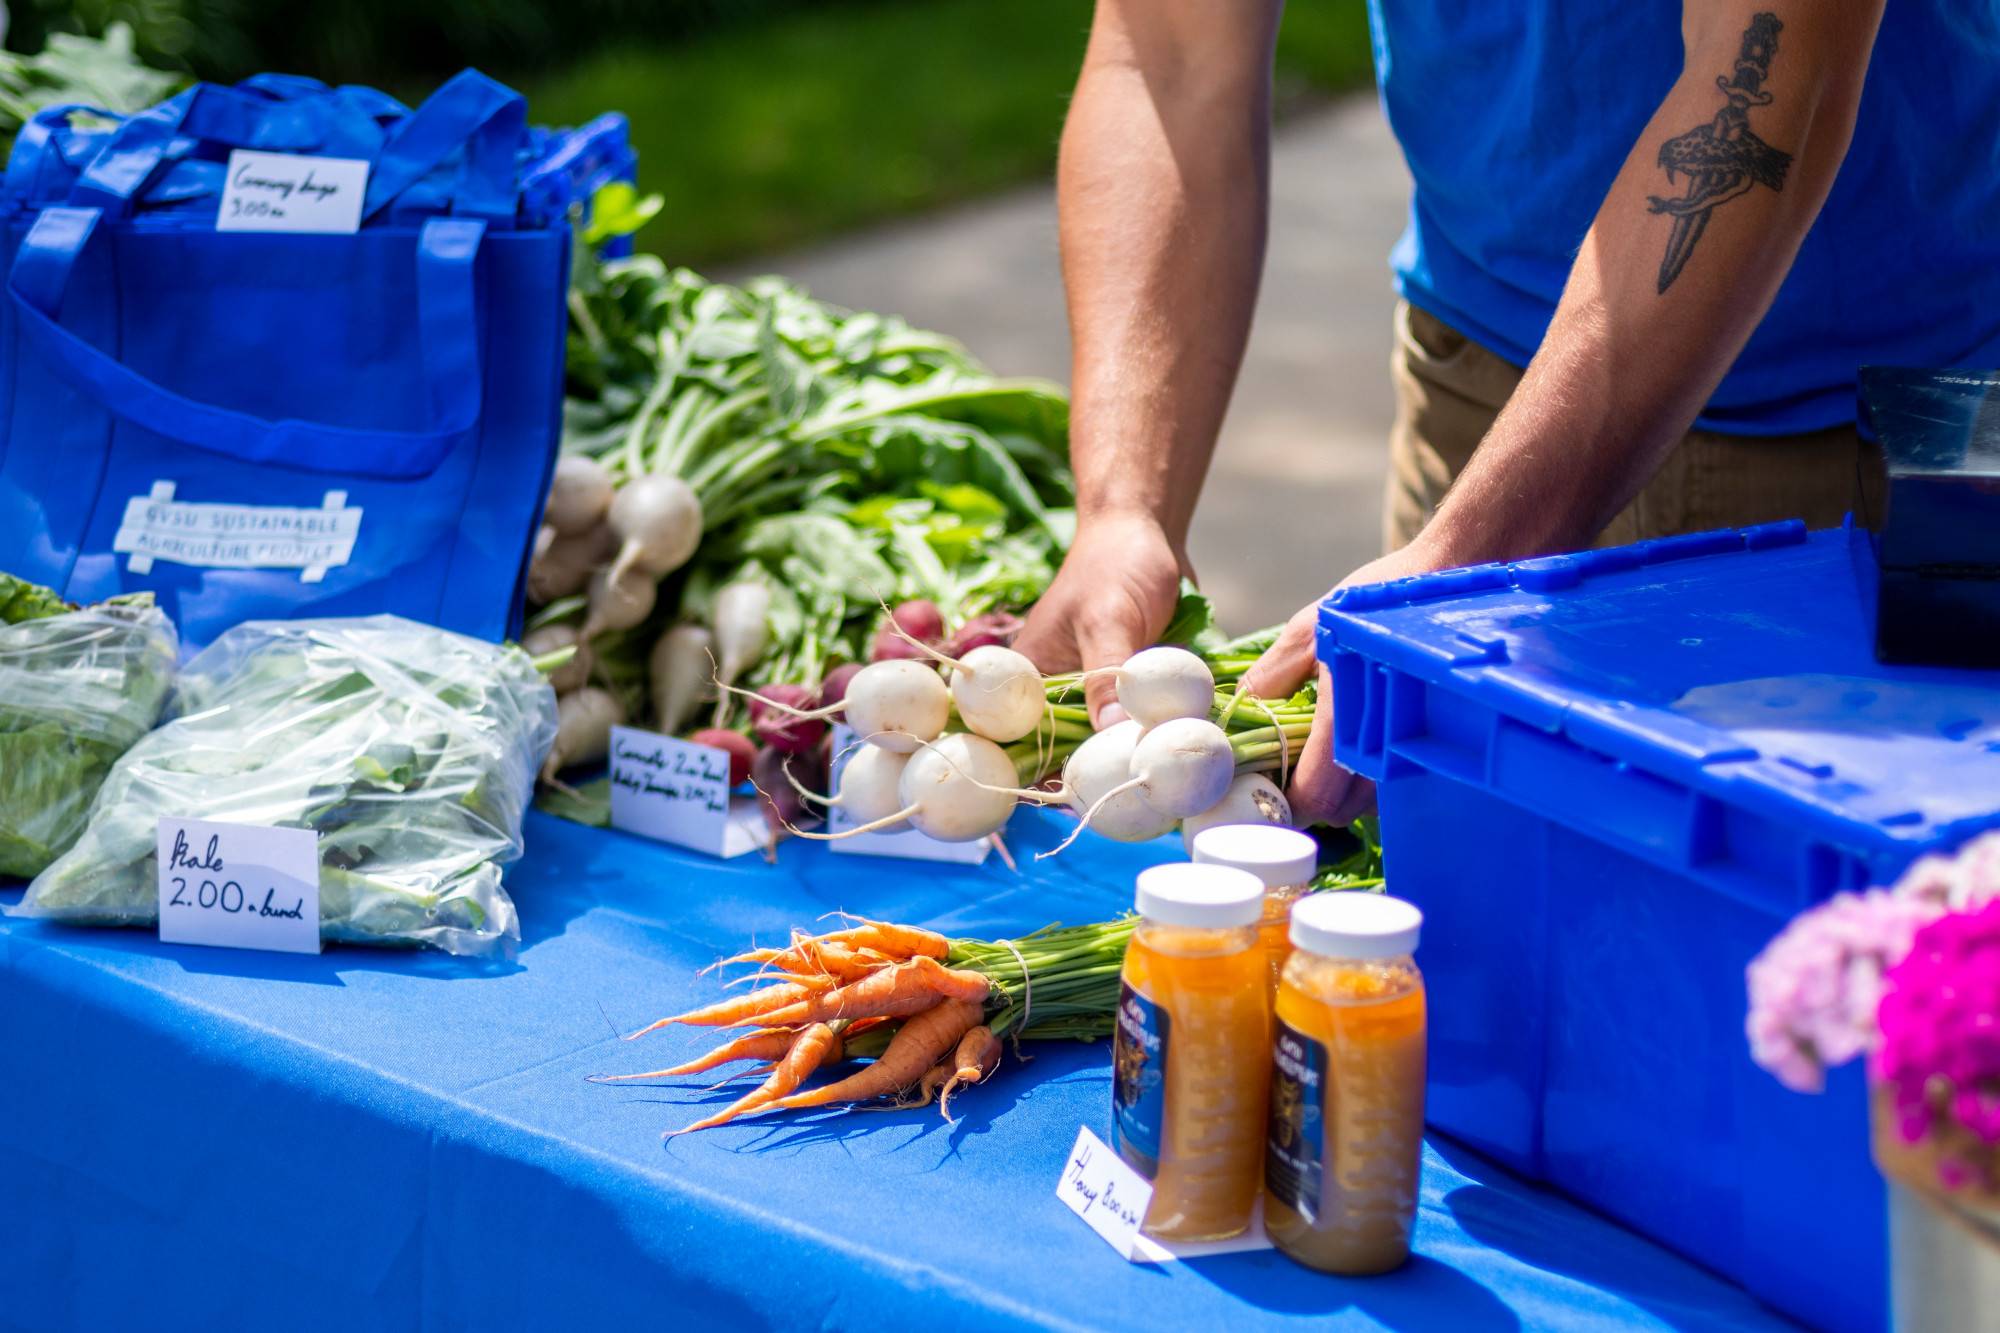 A table at the Farmers Market holding veggies that were grown on the Sustainable Agriculture Project farm at GVSU, and honey from the GVSU Beekeepers Club